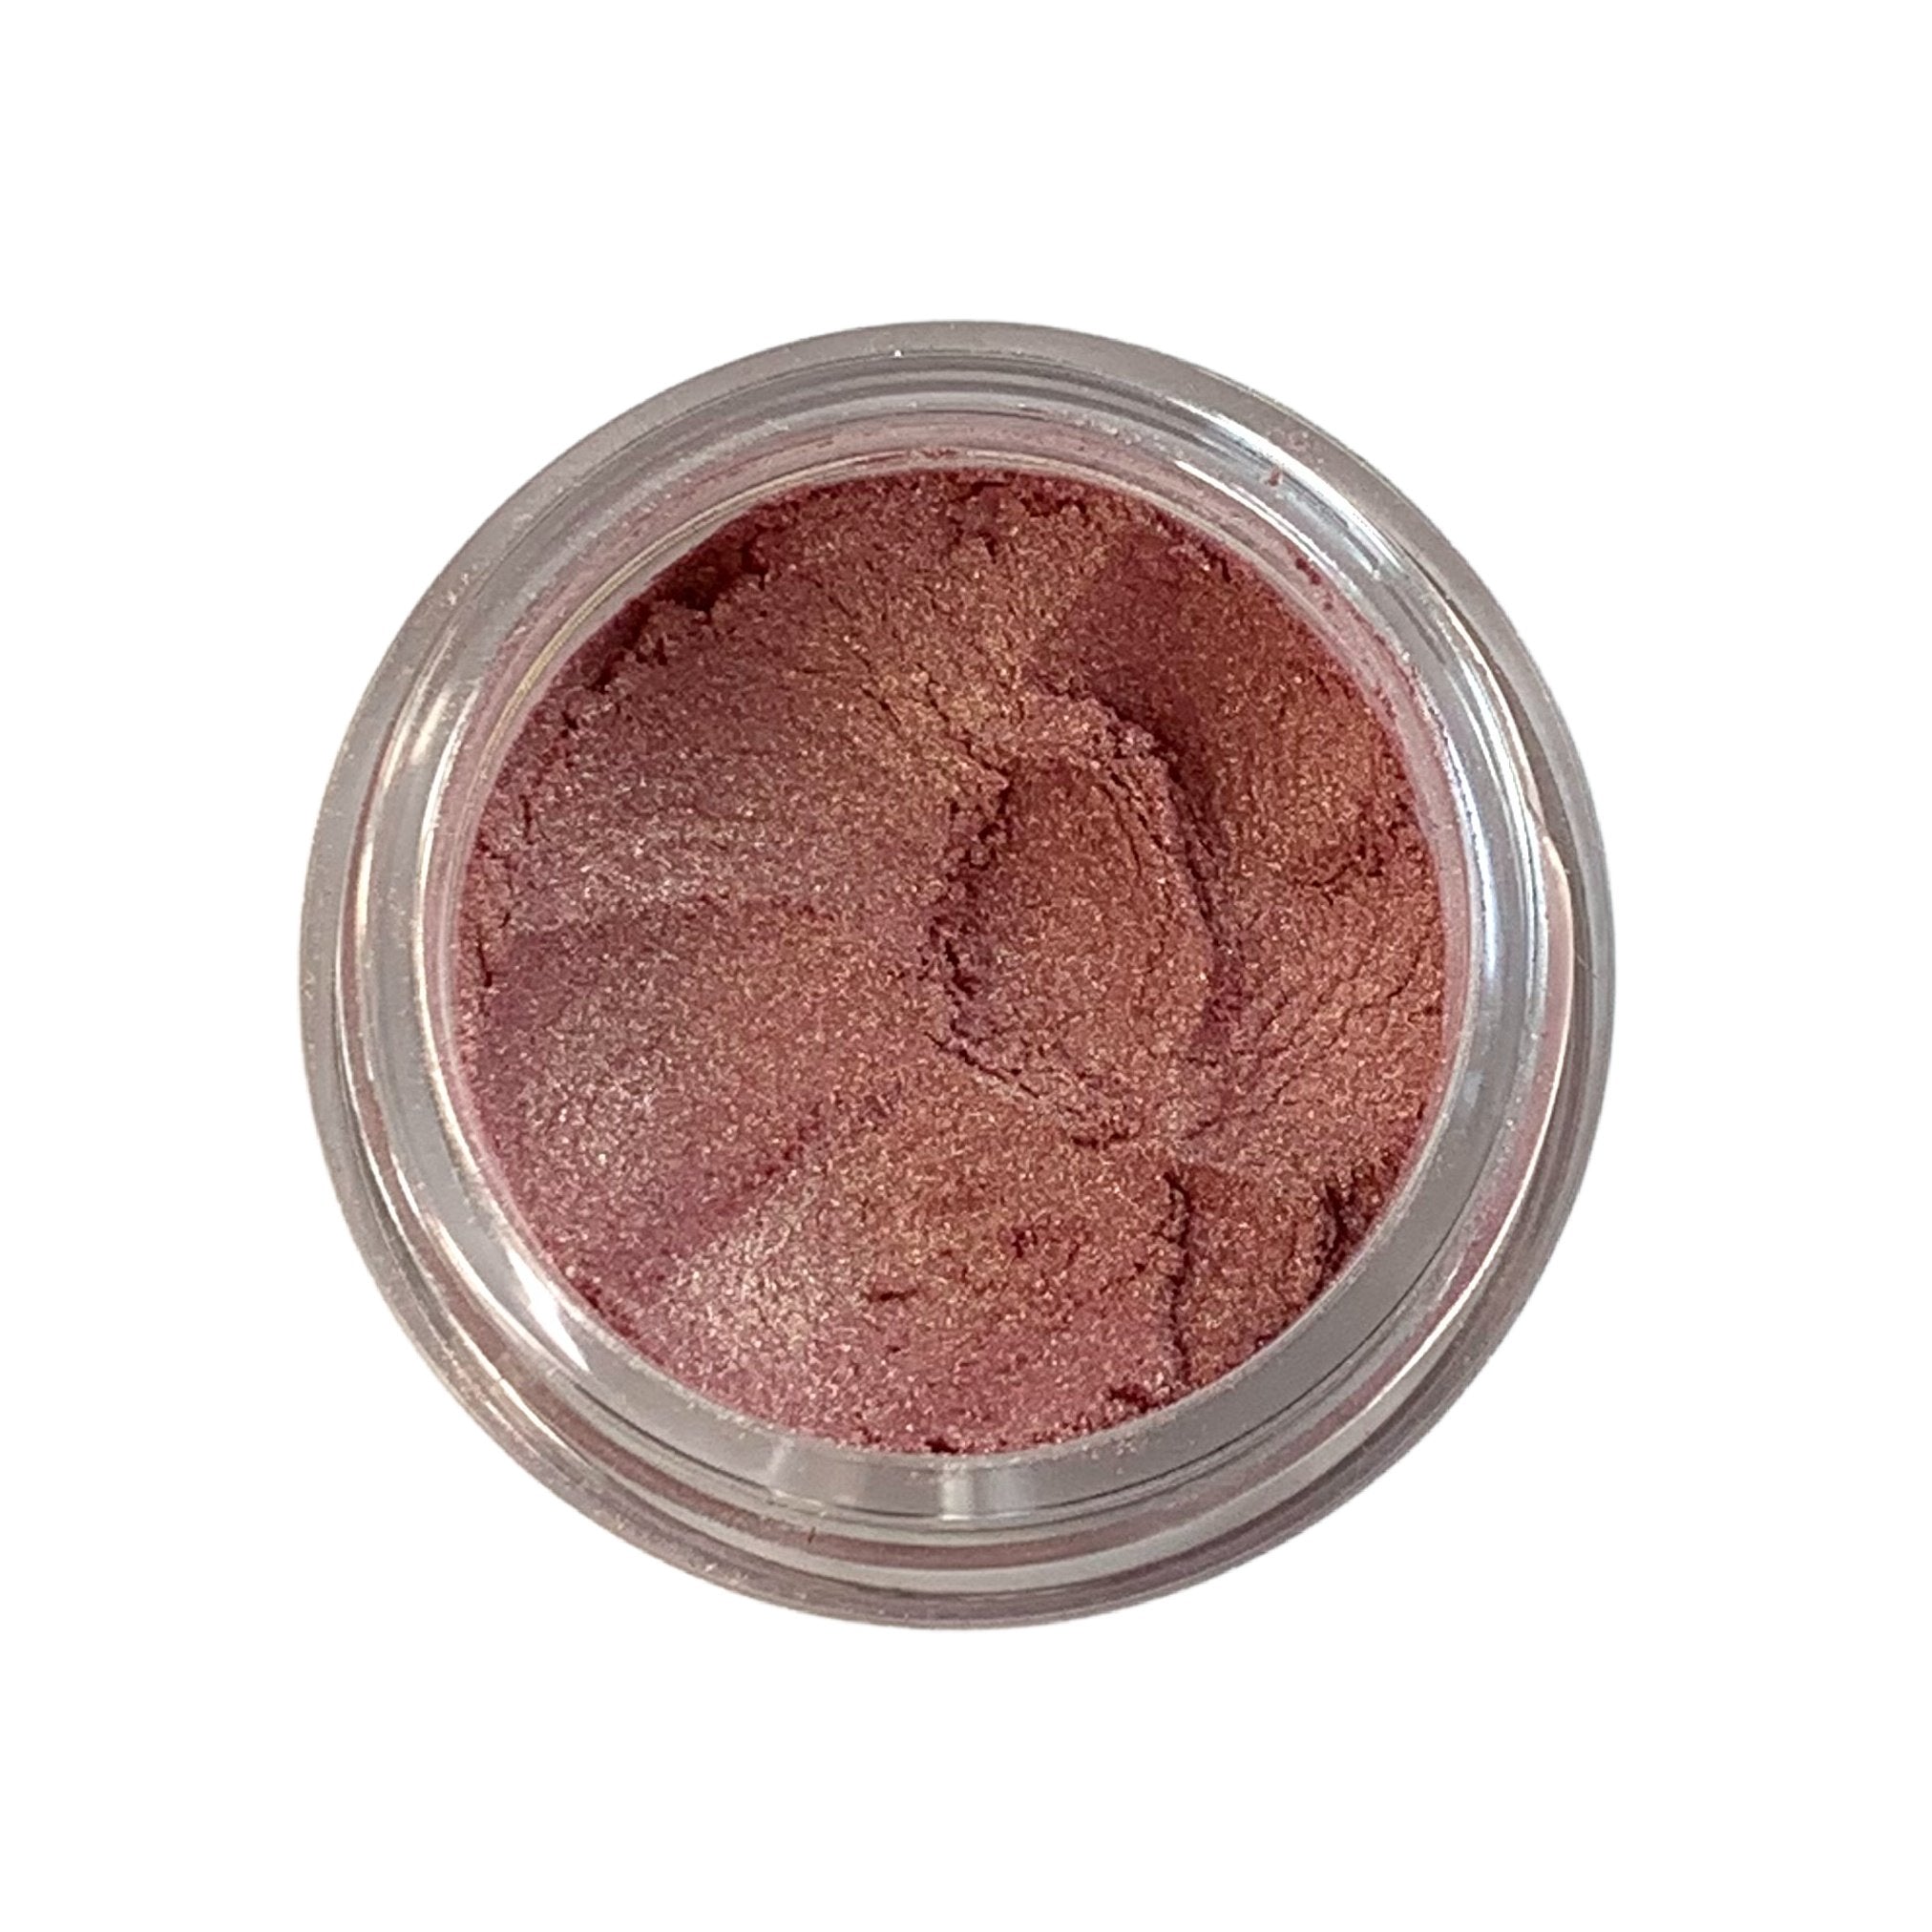 guava a blend of light pink and peach. loose mineral eyeshadow in a 10gram sifter jar. vegan and cruelty free